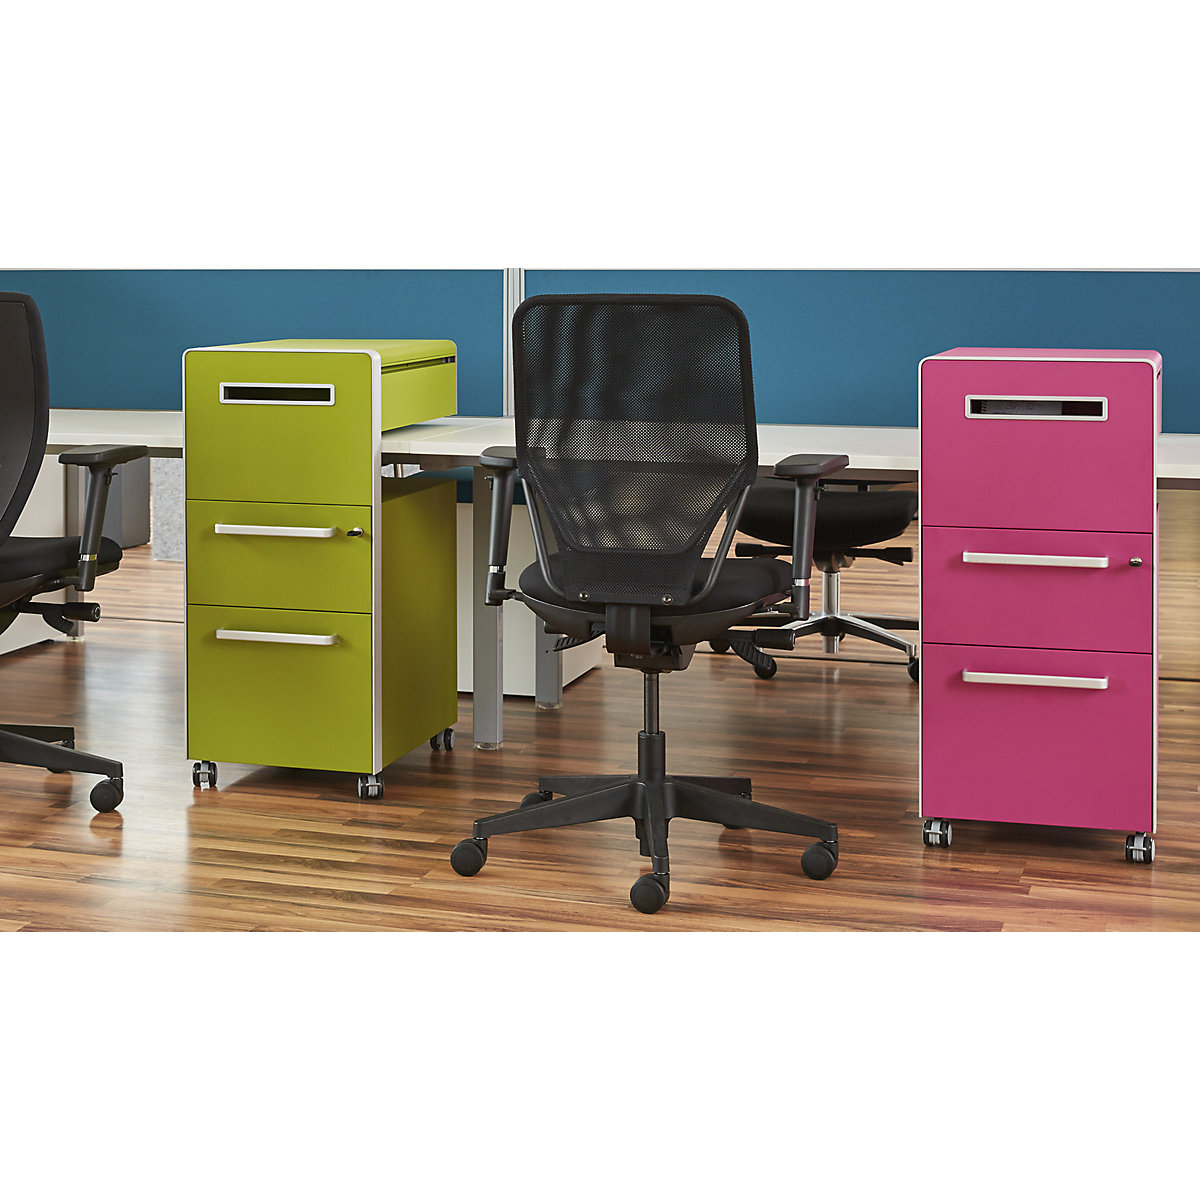 Bite™ pedestal furniture, with 1 pin board, opens on the right side – BISLEY (Product illustration 3)-2